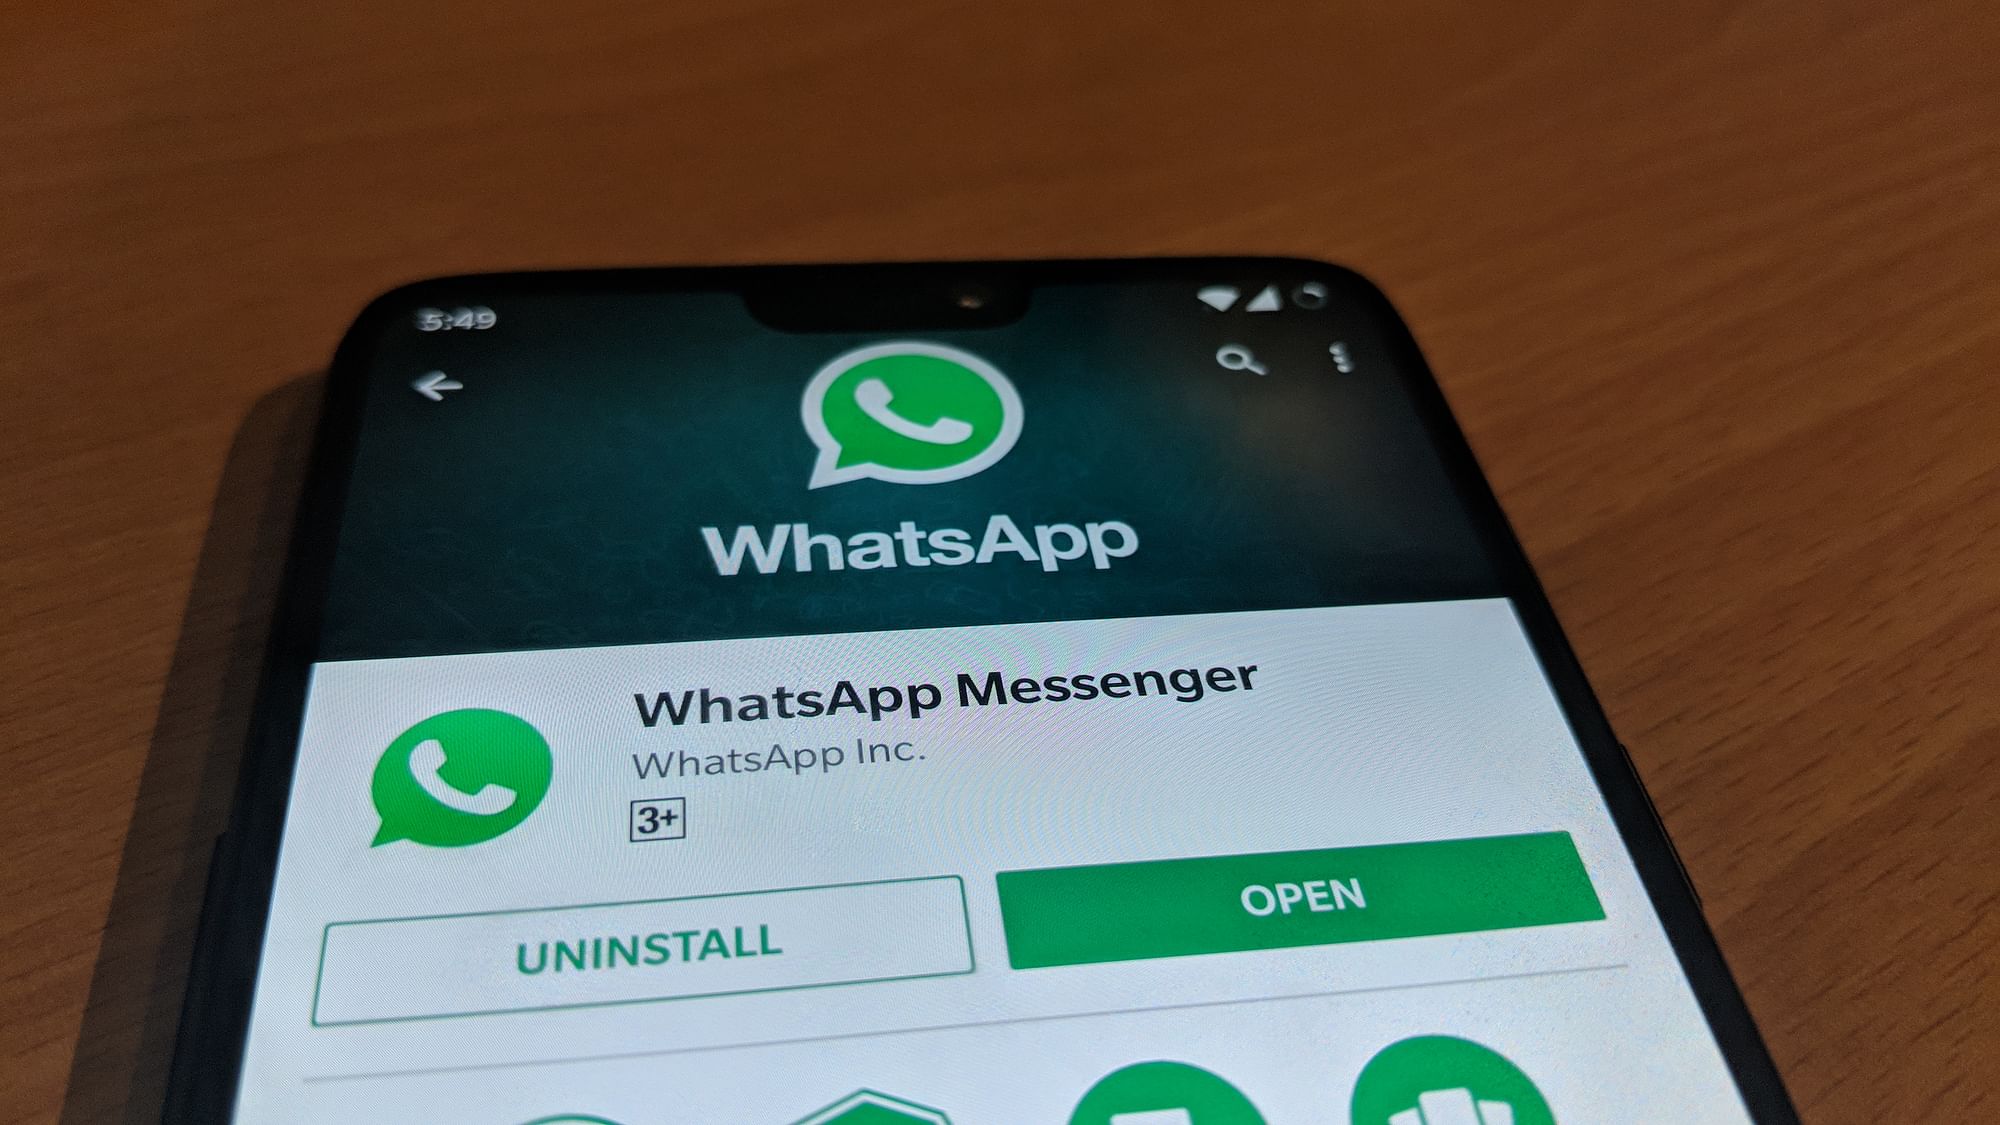 WhatsApp dark mode is yet to launch for users.